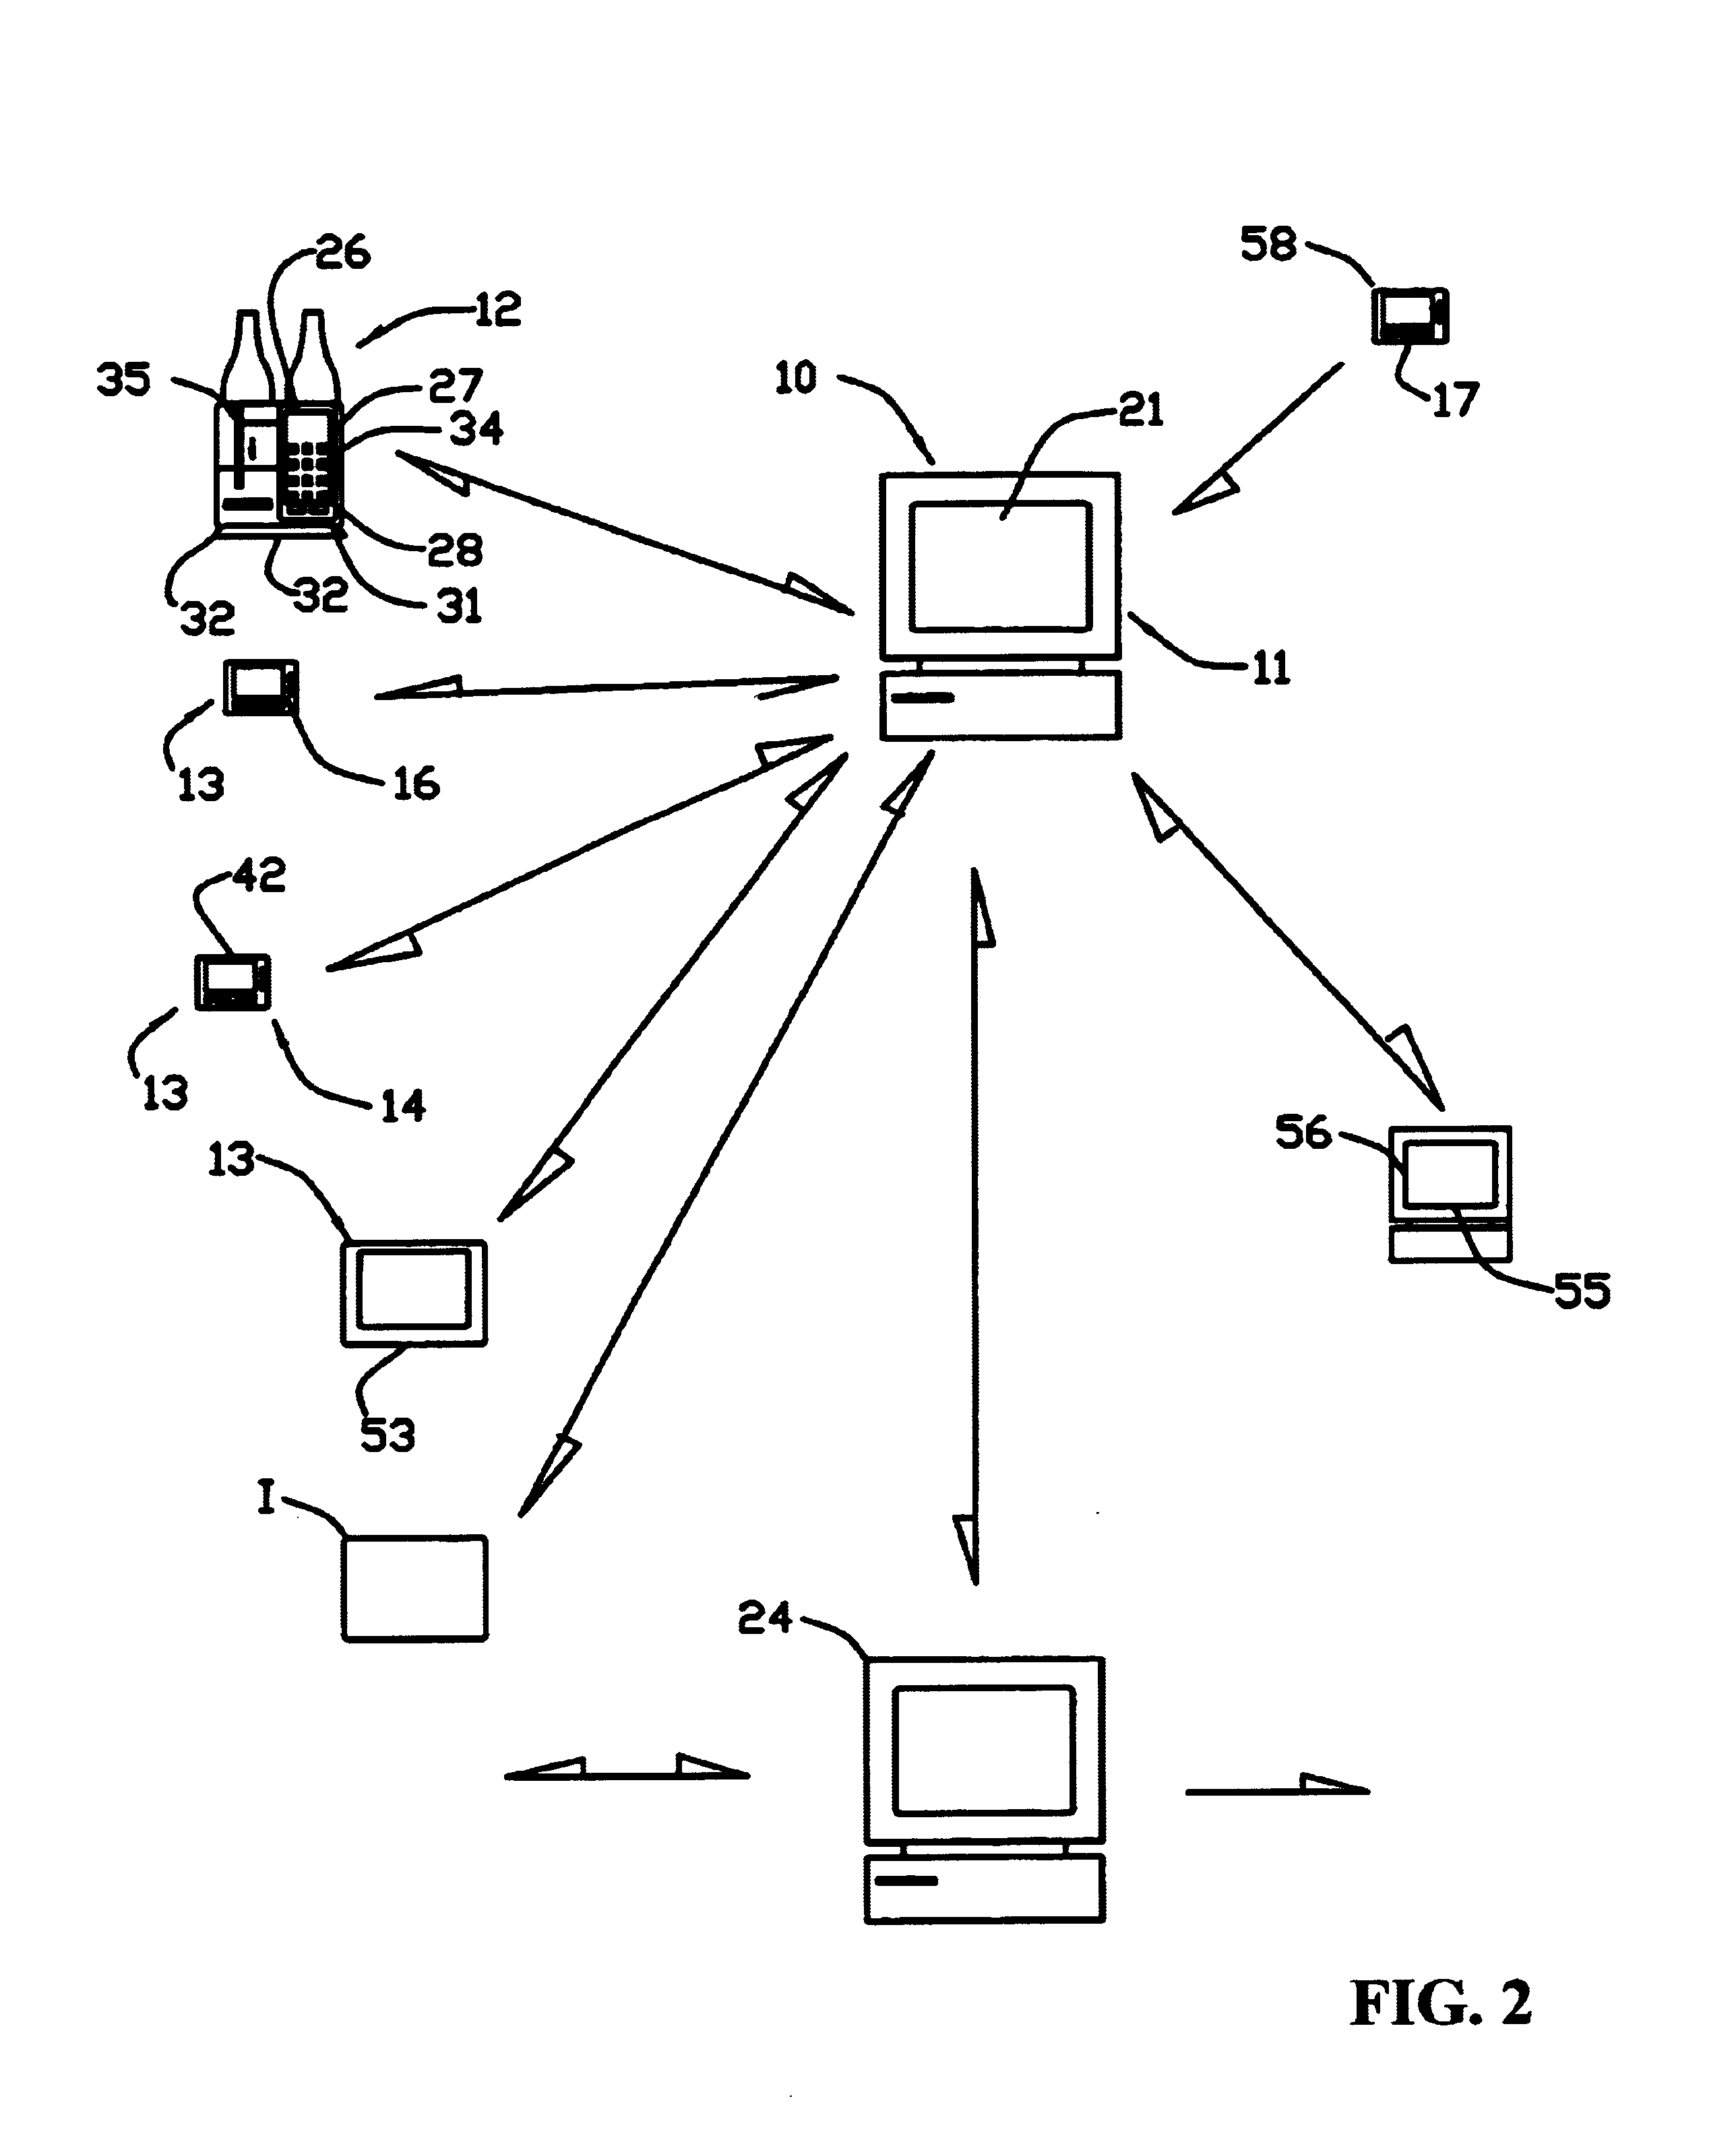 Computer integrated communication system for restaurants